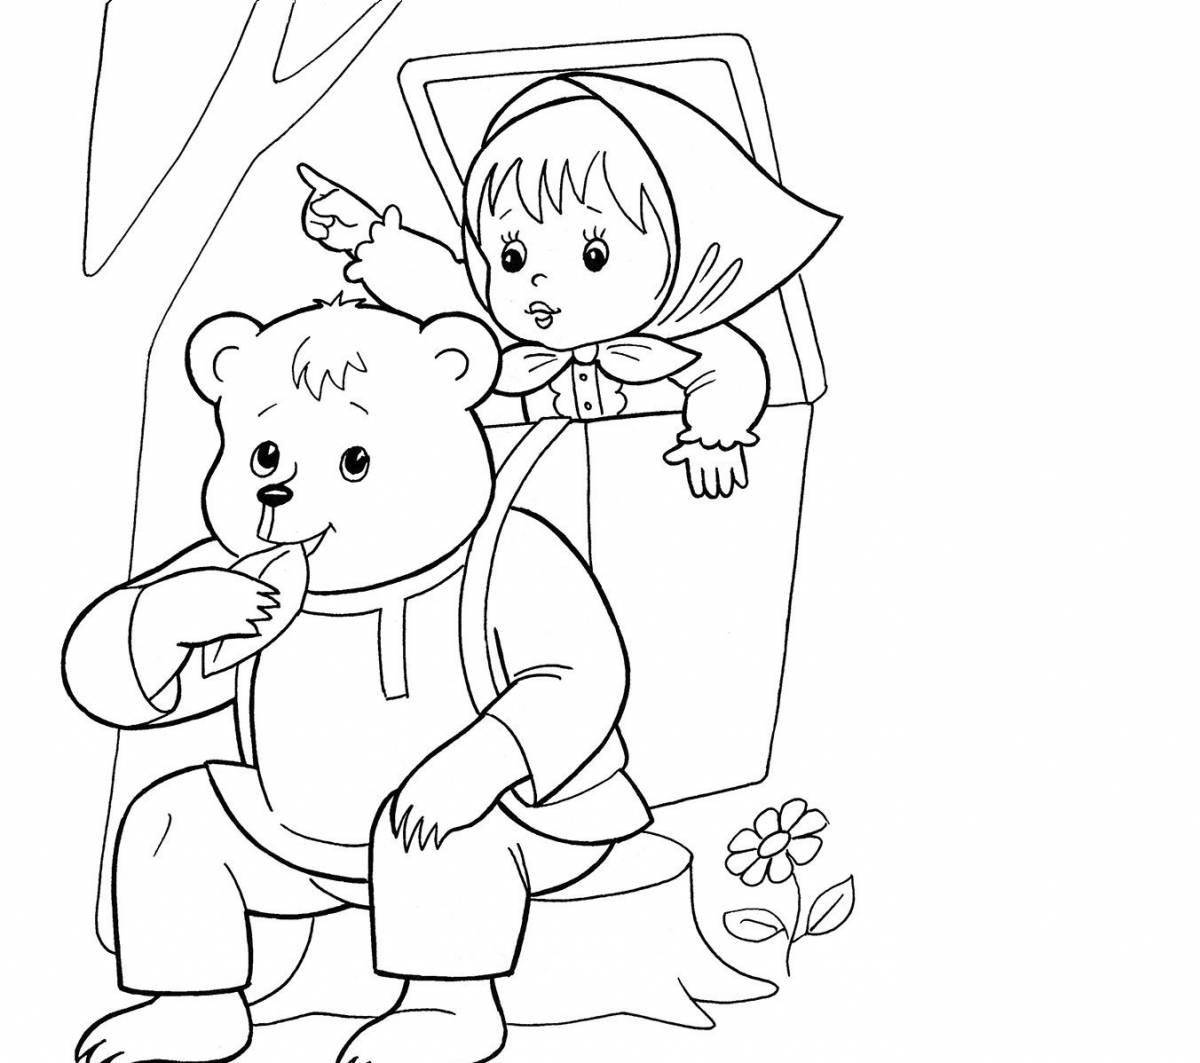 Magic coloring book visiting a fairy tale 4-5 years old middle group